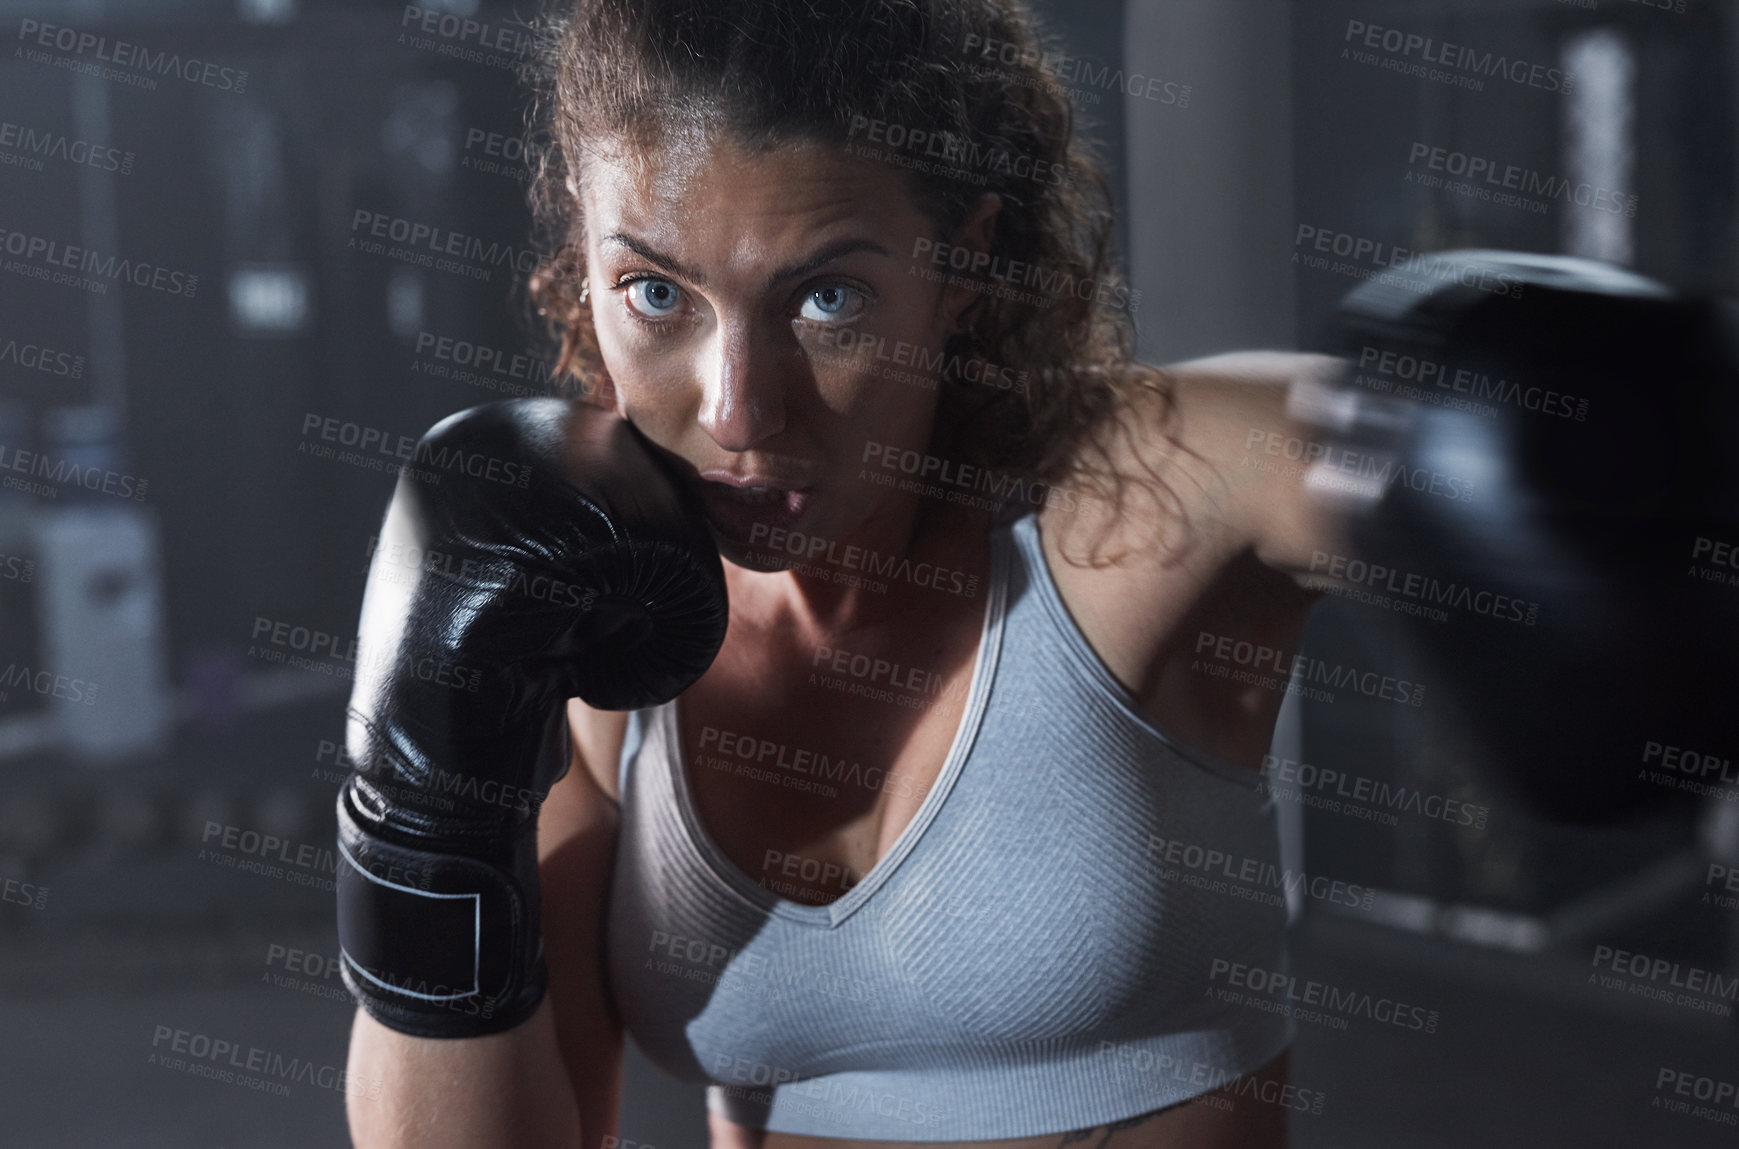 Buy stock photo Portrait of a young woman practicing her boxing routine at a gym